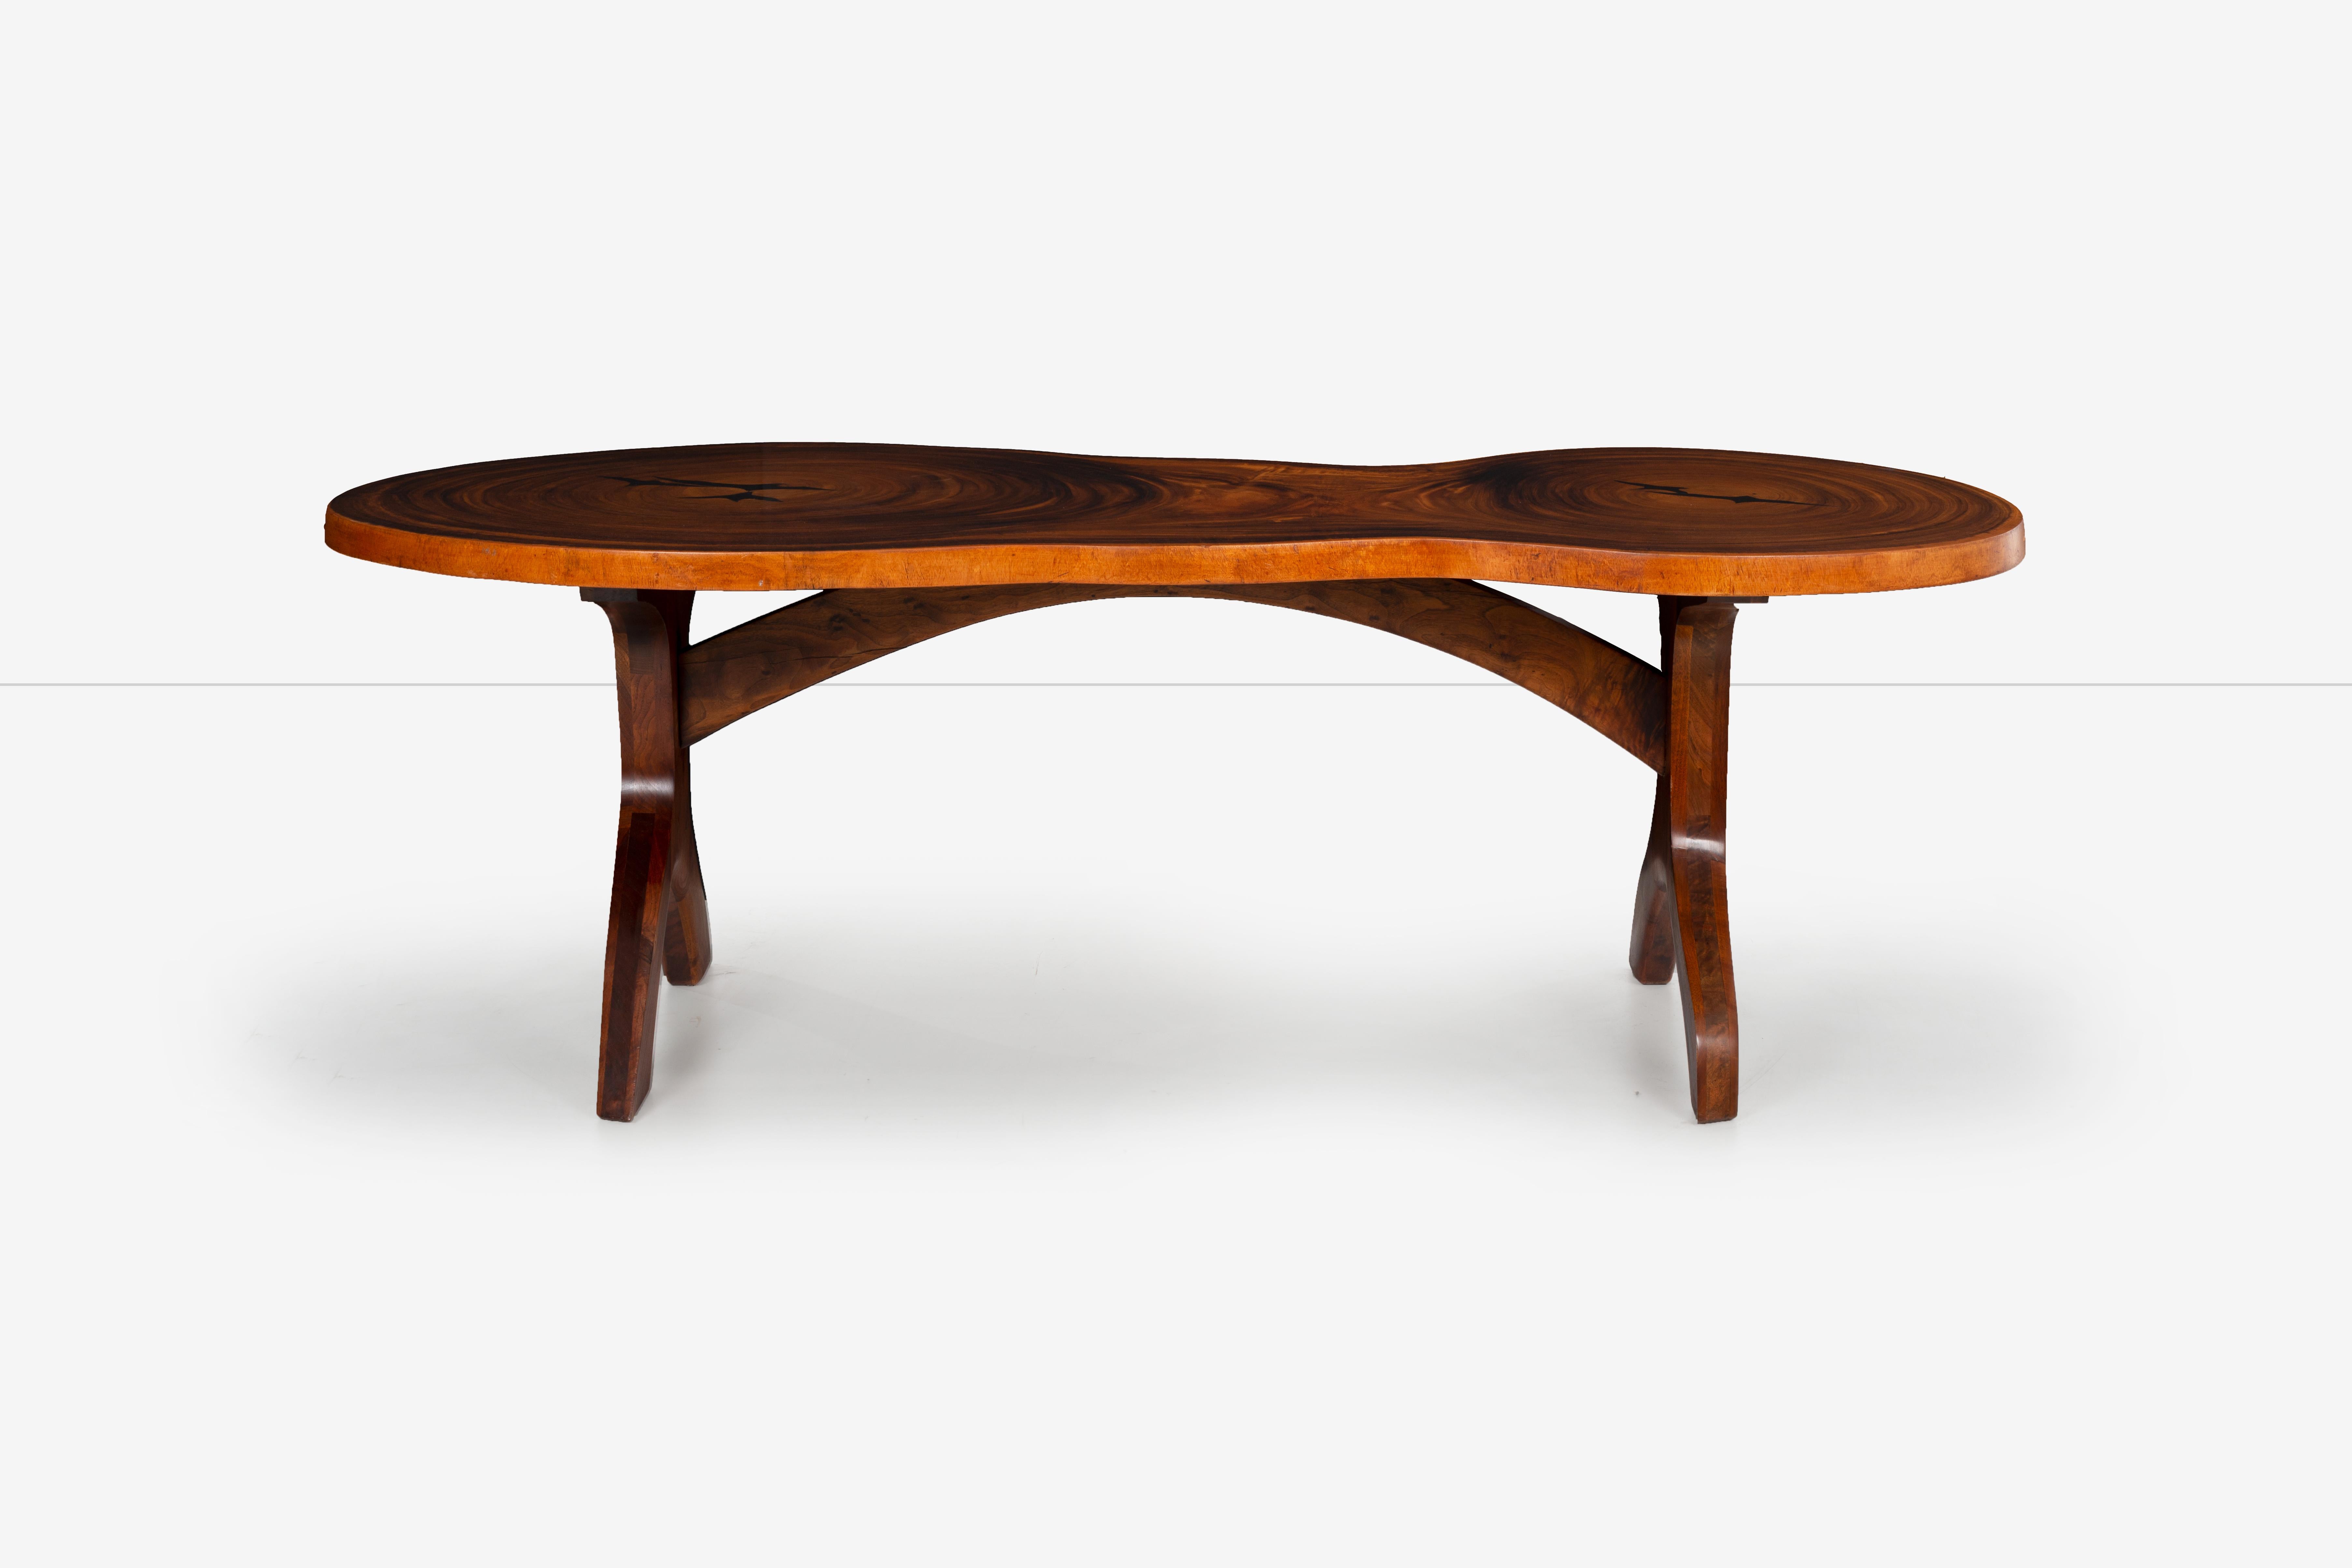 Arthur Espenet Carpenter, unique double-trunk table desk. 
 This extraordinary table is unique to Espenet's work as it deviates from the traditional rectilinear form with its well-figured and unusual double-trunk Genisaro slab. Genisaro is a